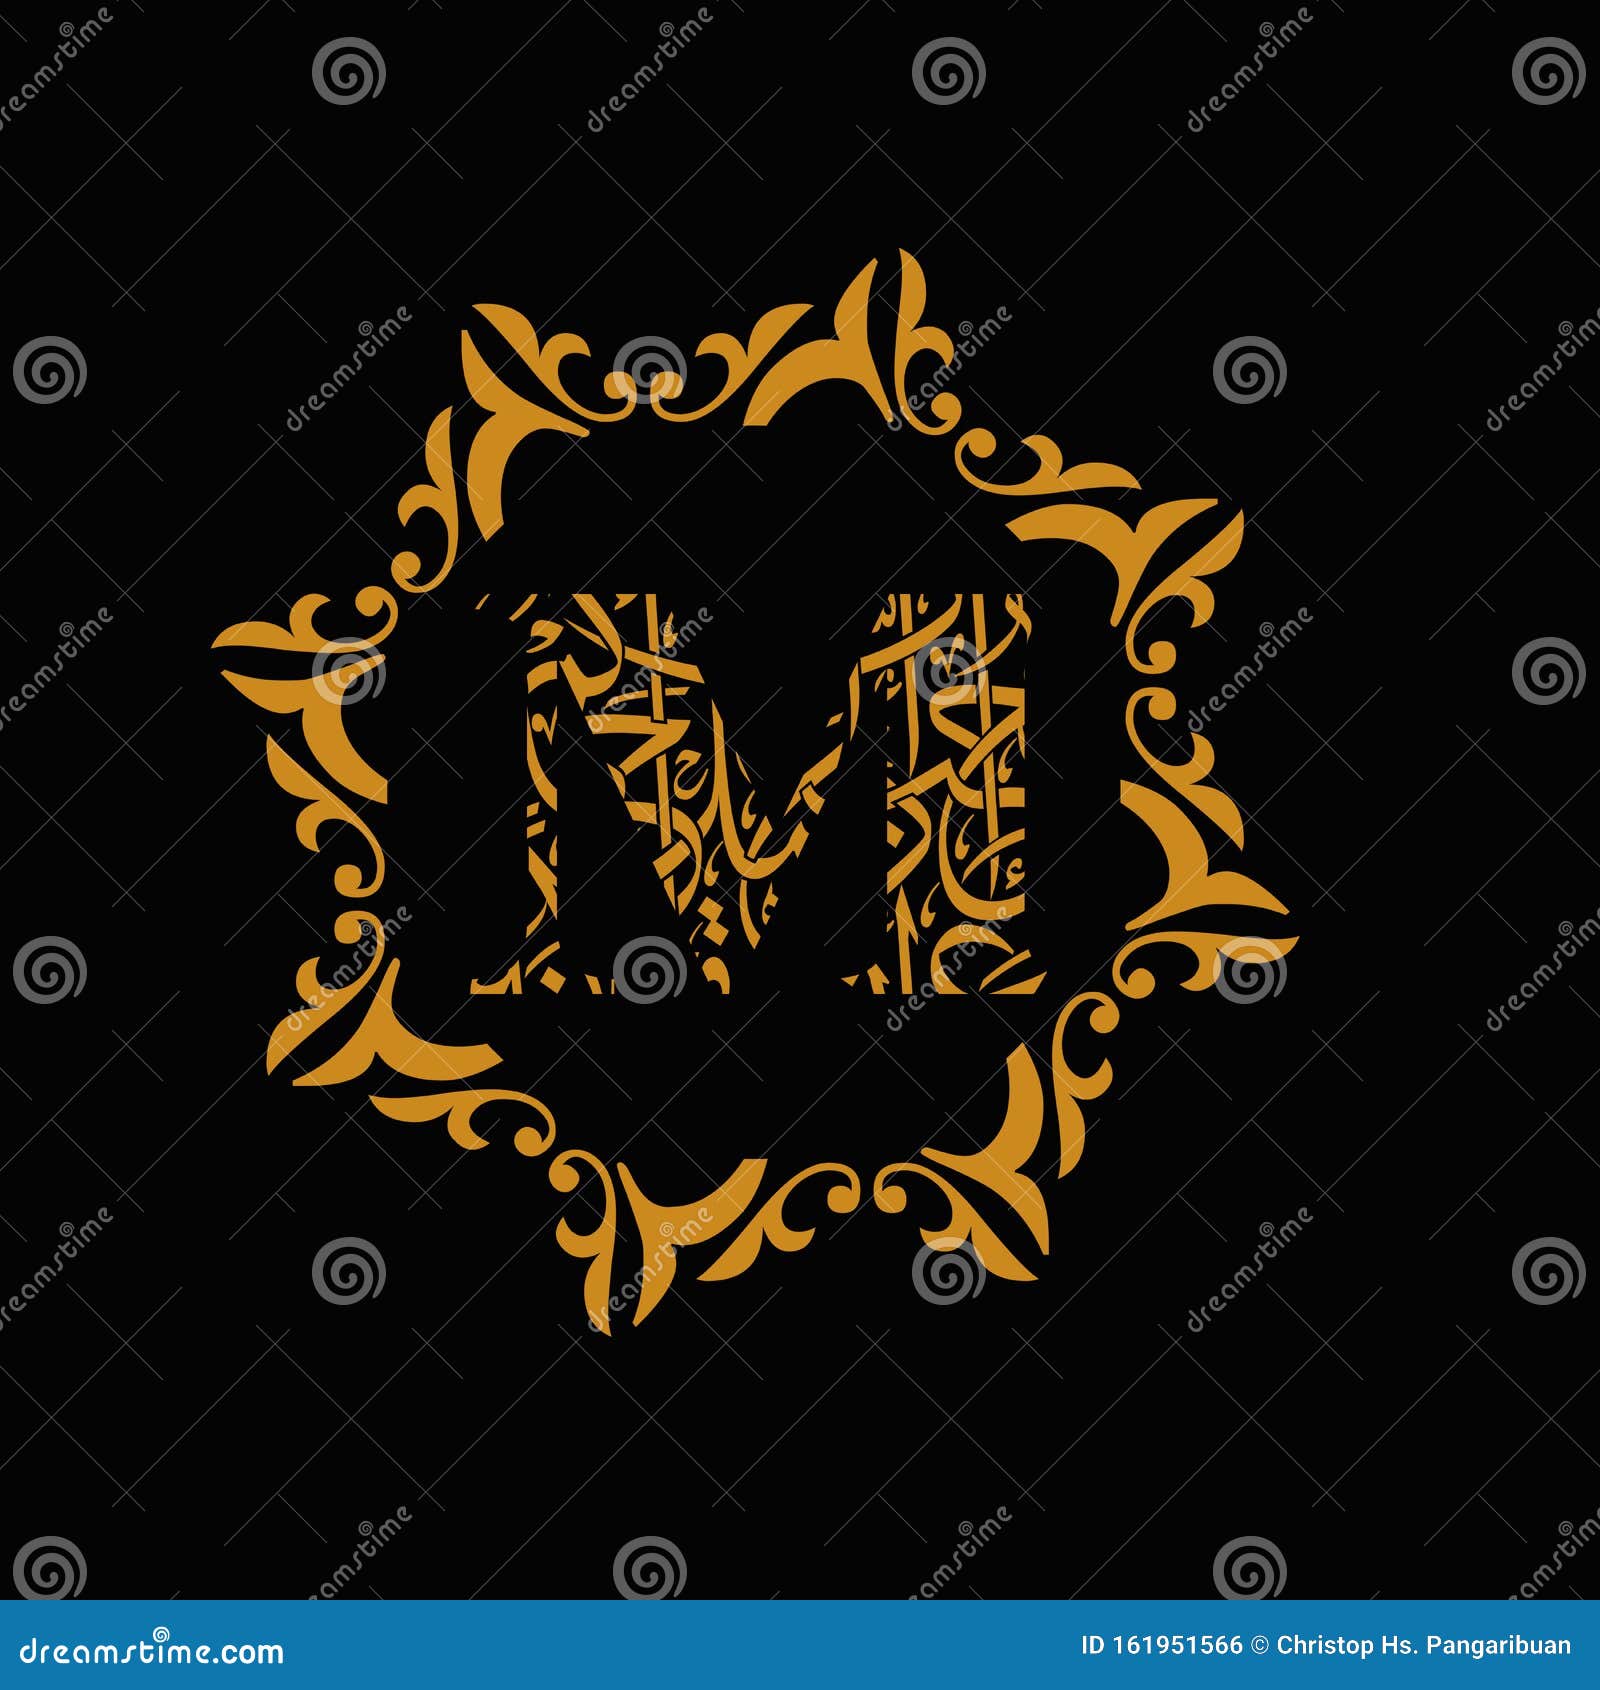 The M Letter by Arabic Islamic Font Style and Golden Flower Logo Design  Style Stock Illustration - Illustration of design, logo: 161951566